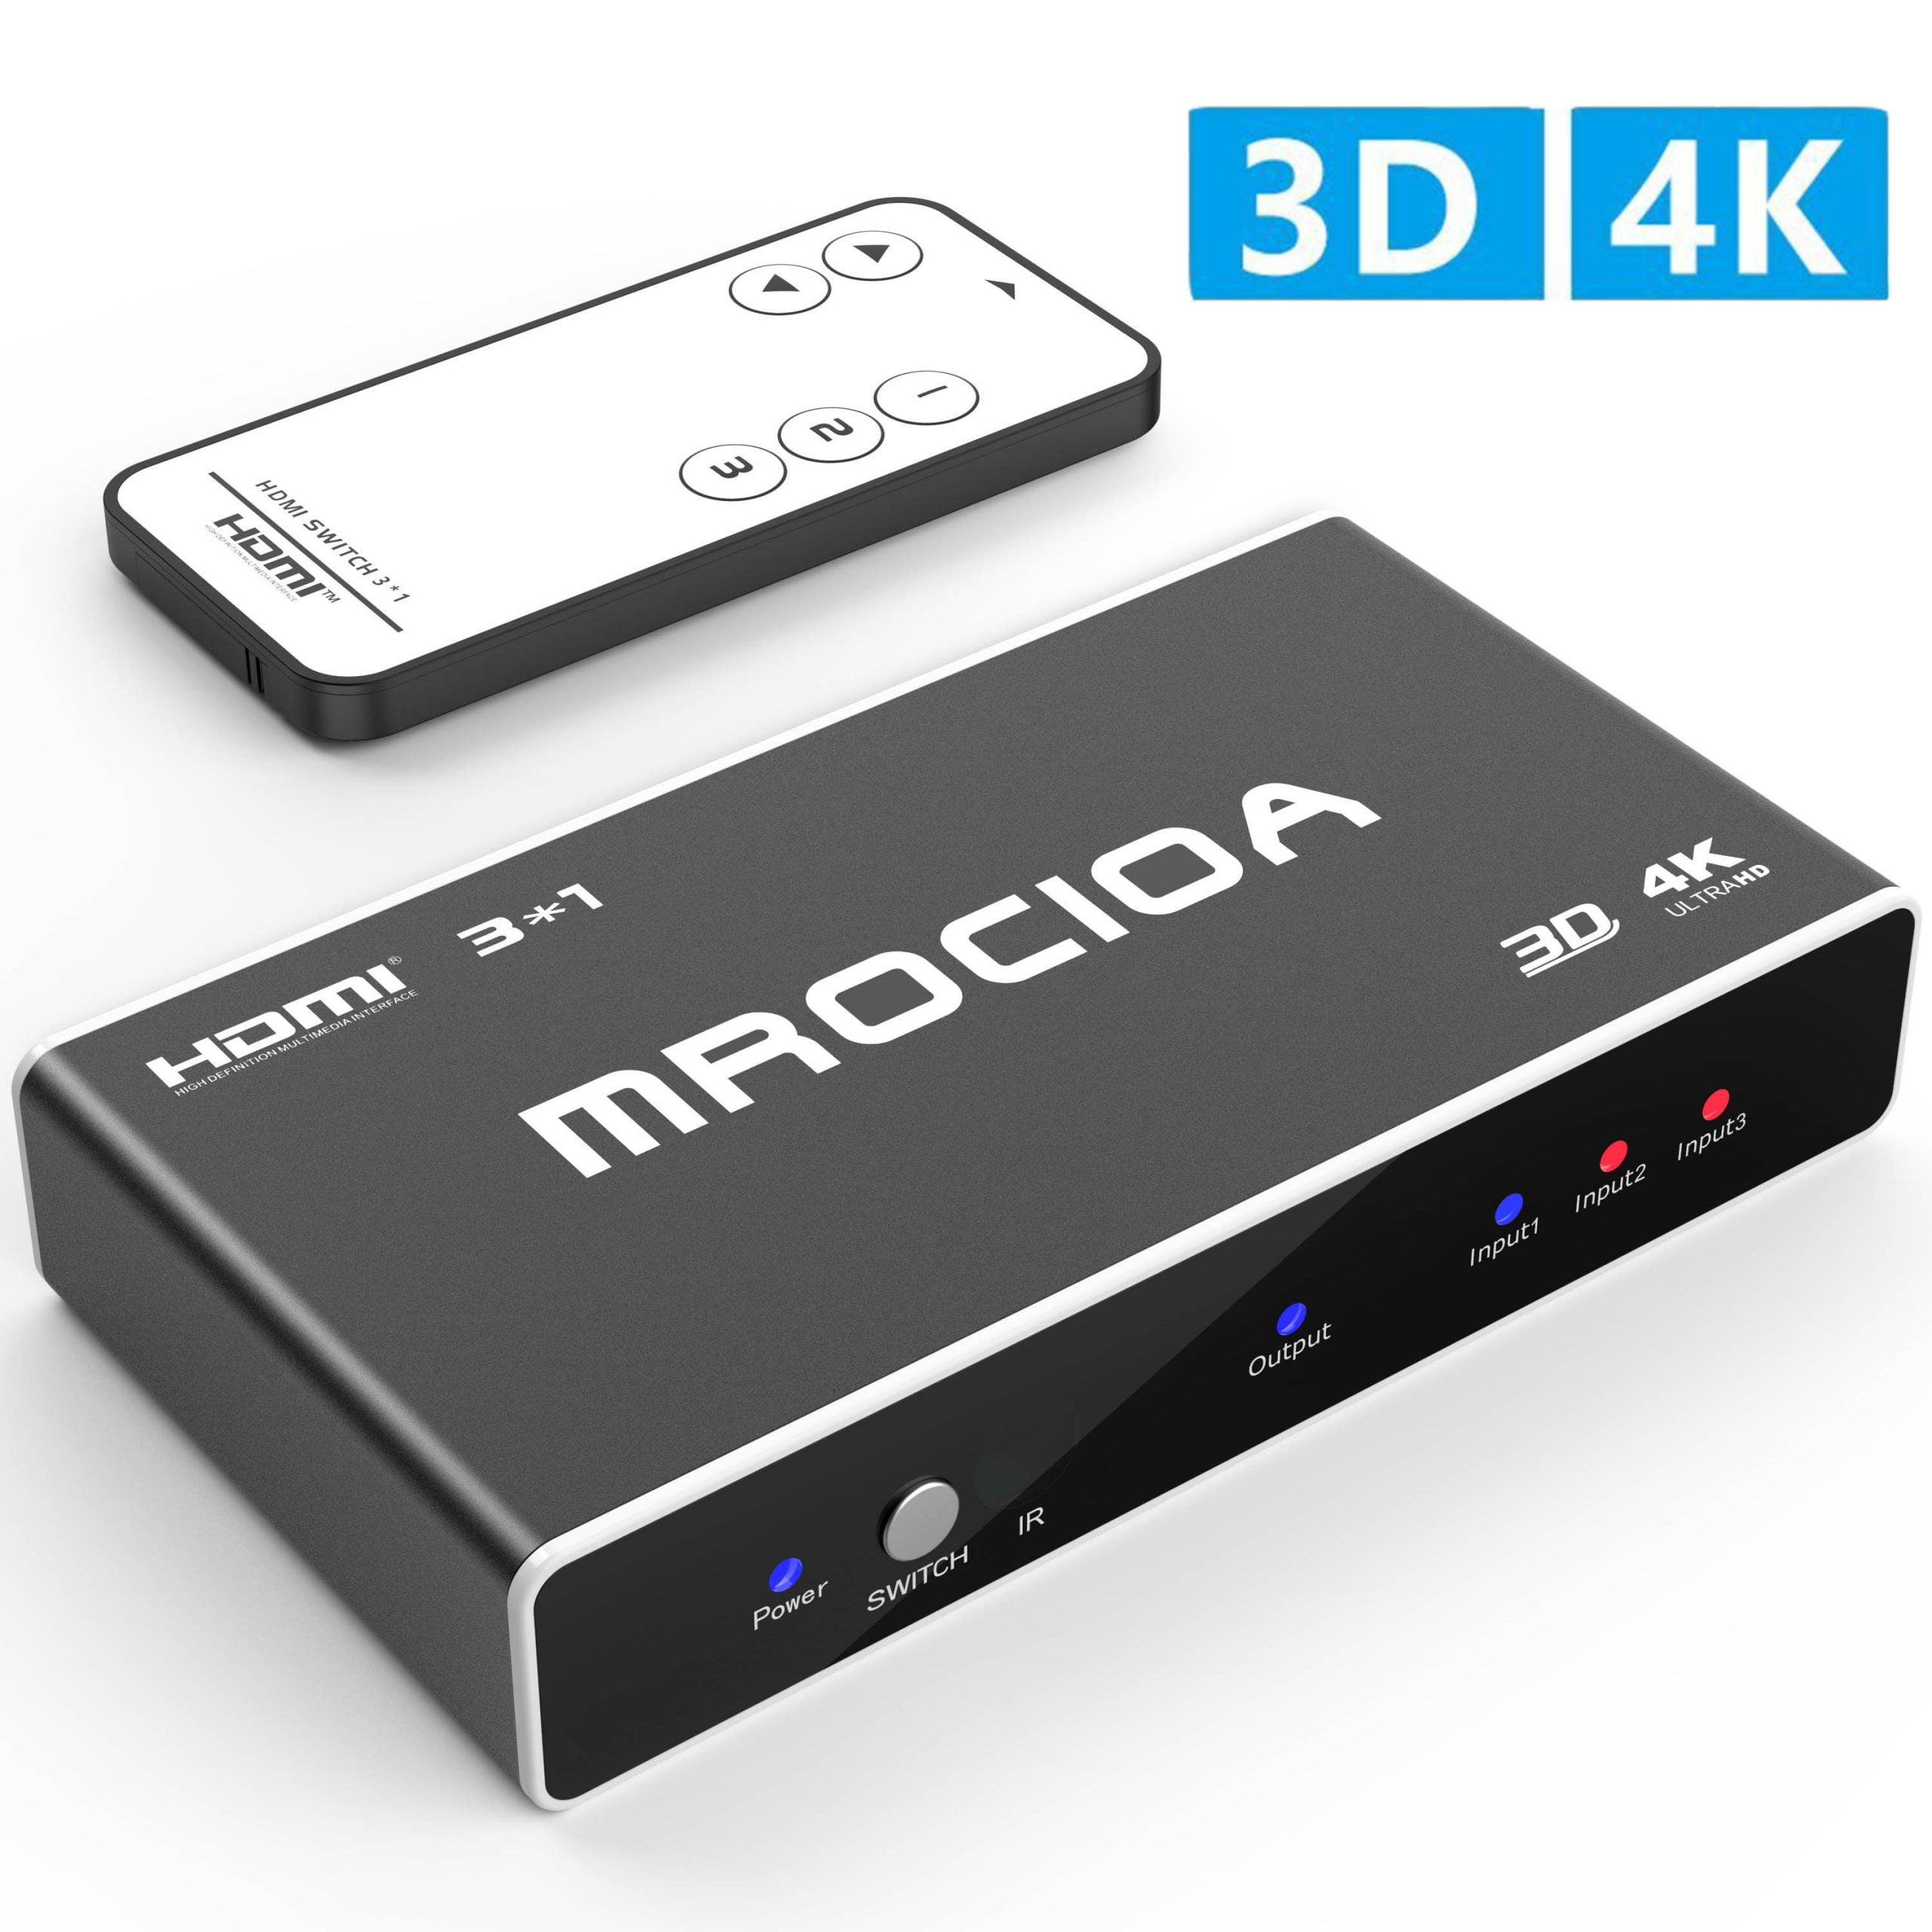 Ultra HD 2x2 HDMI Matrix Switch 4K with Audio Extractor (UHDS-202)